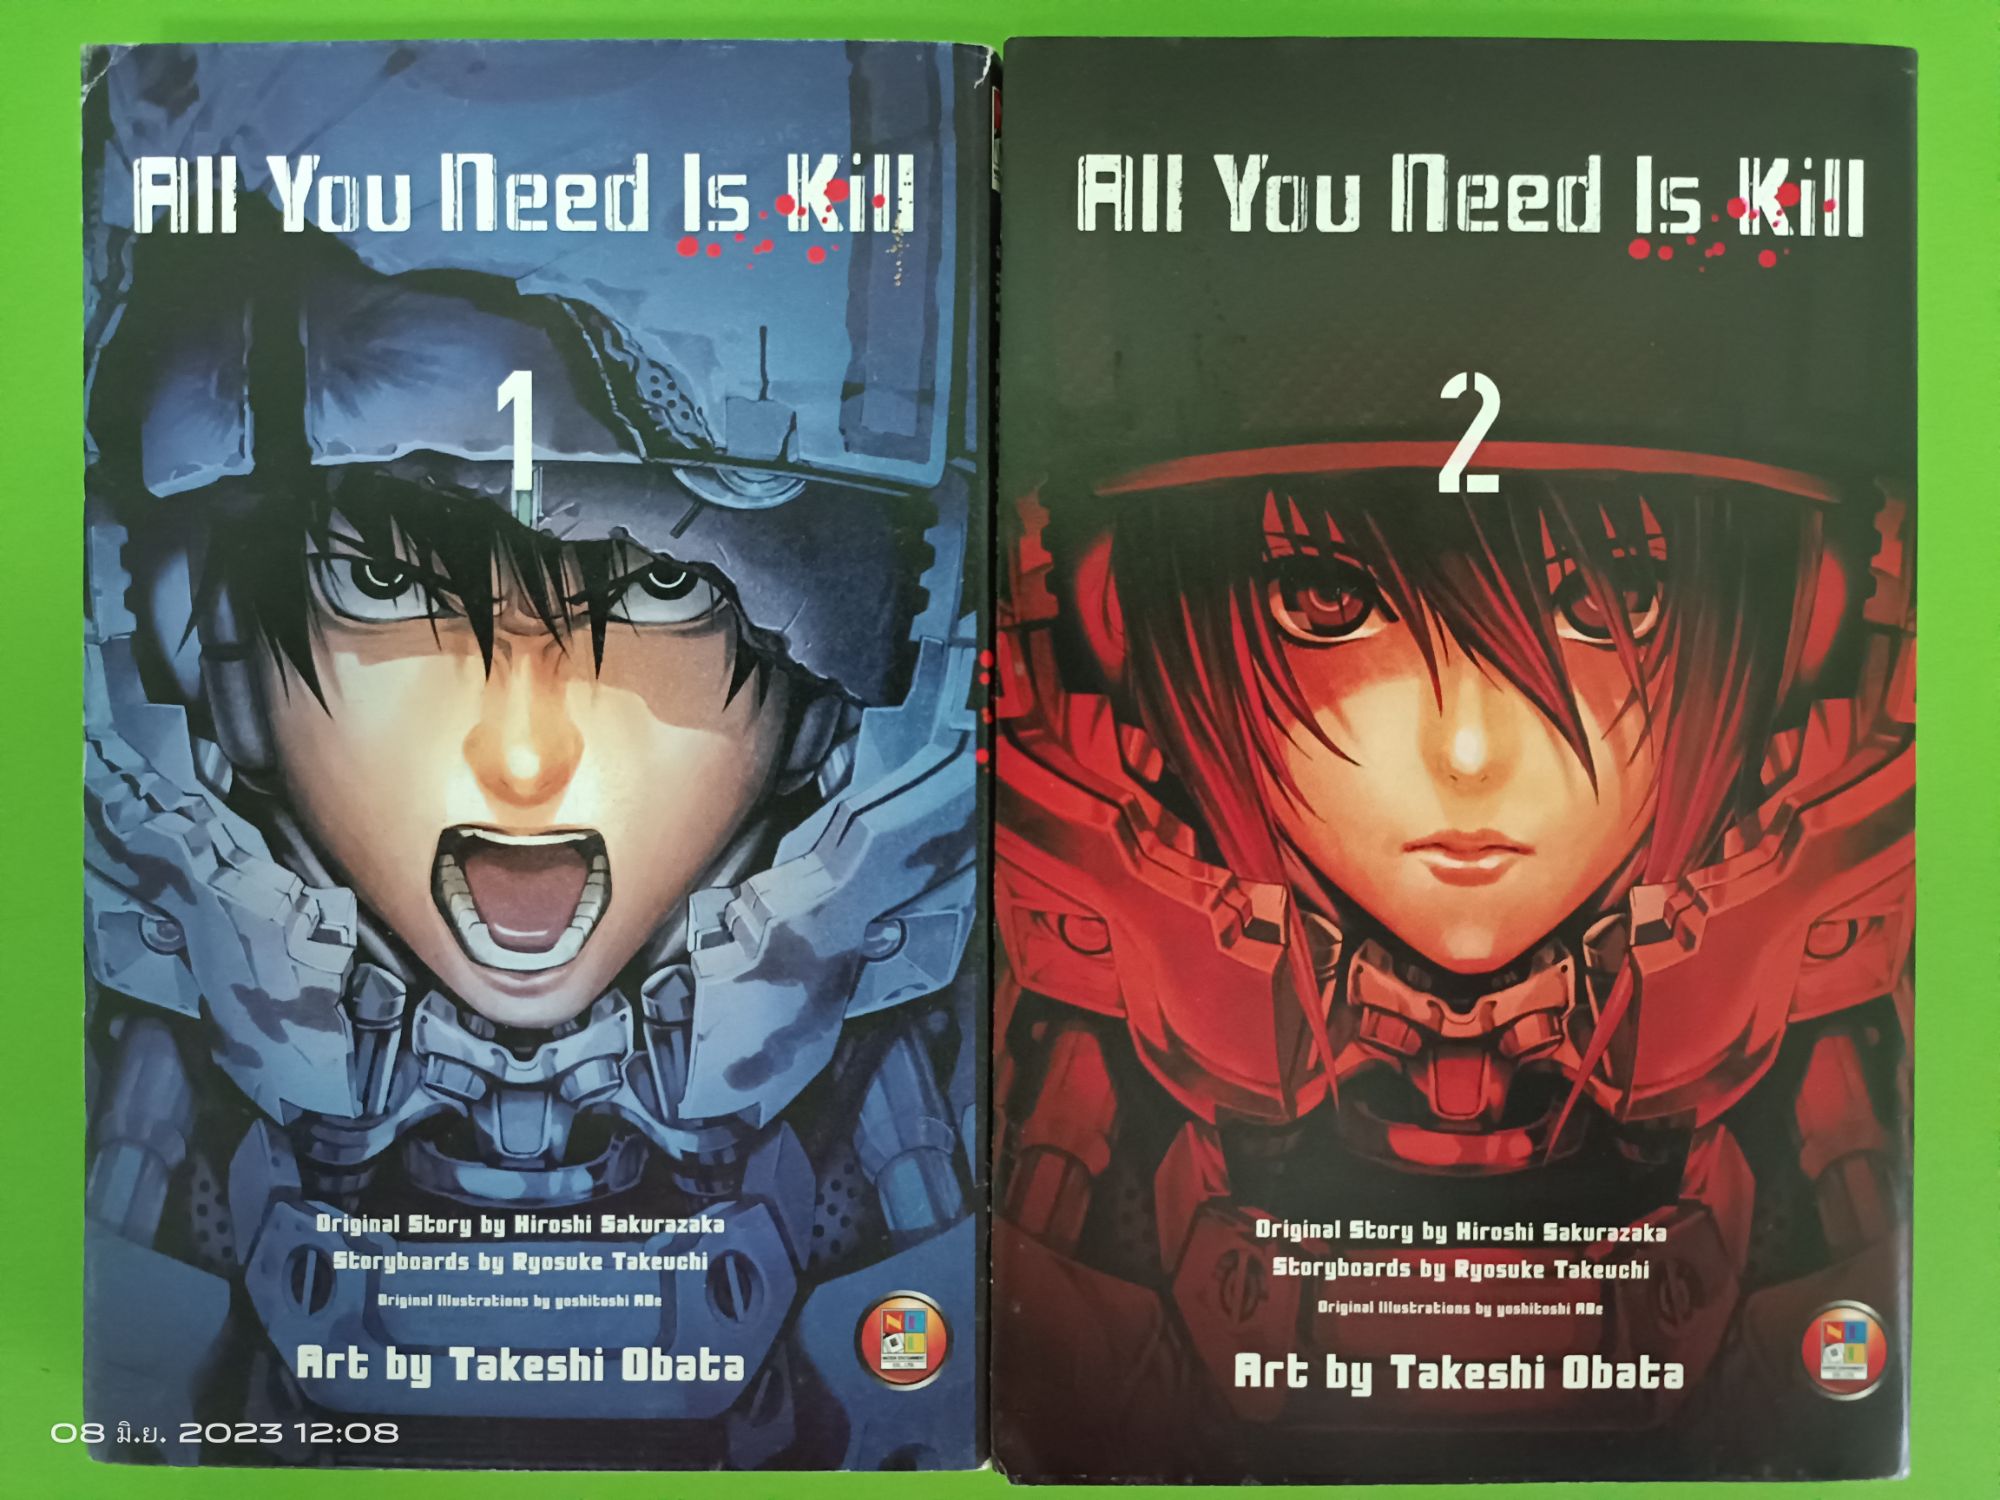 All You Need Is Kill 2巻セット - 少年漫画